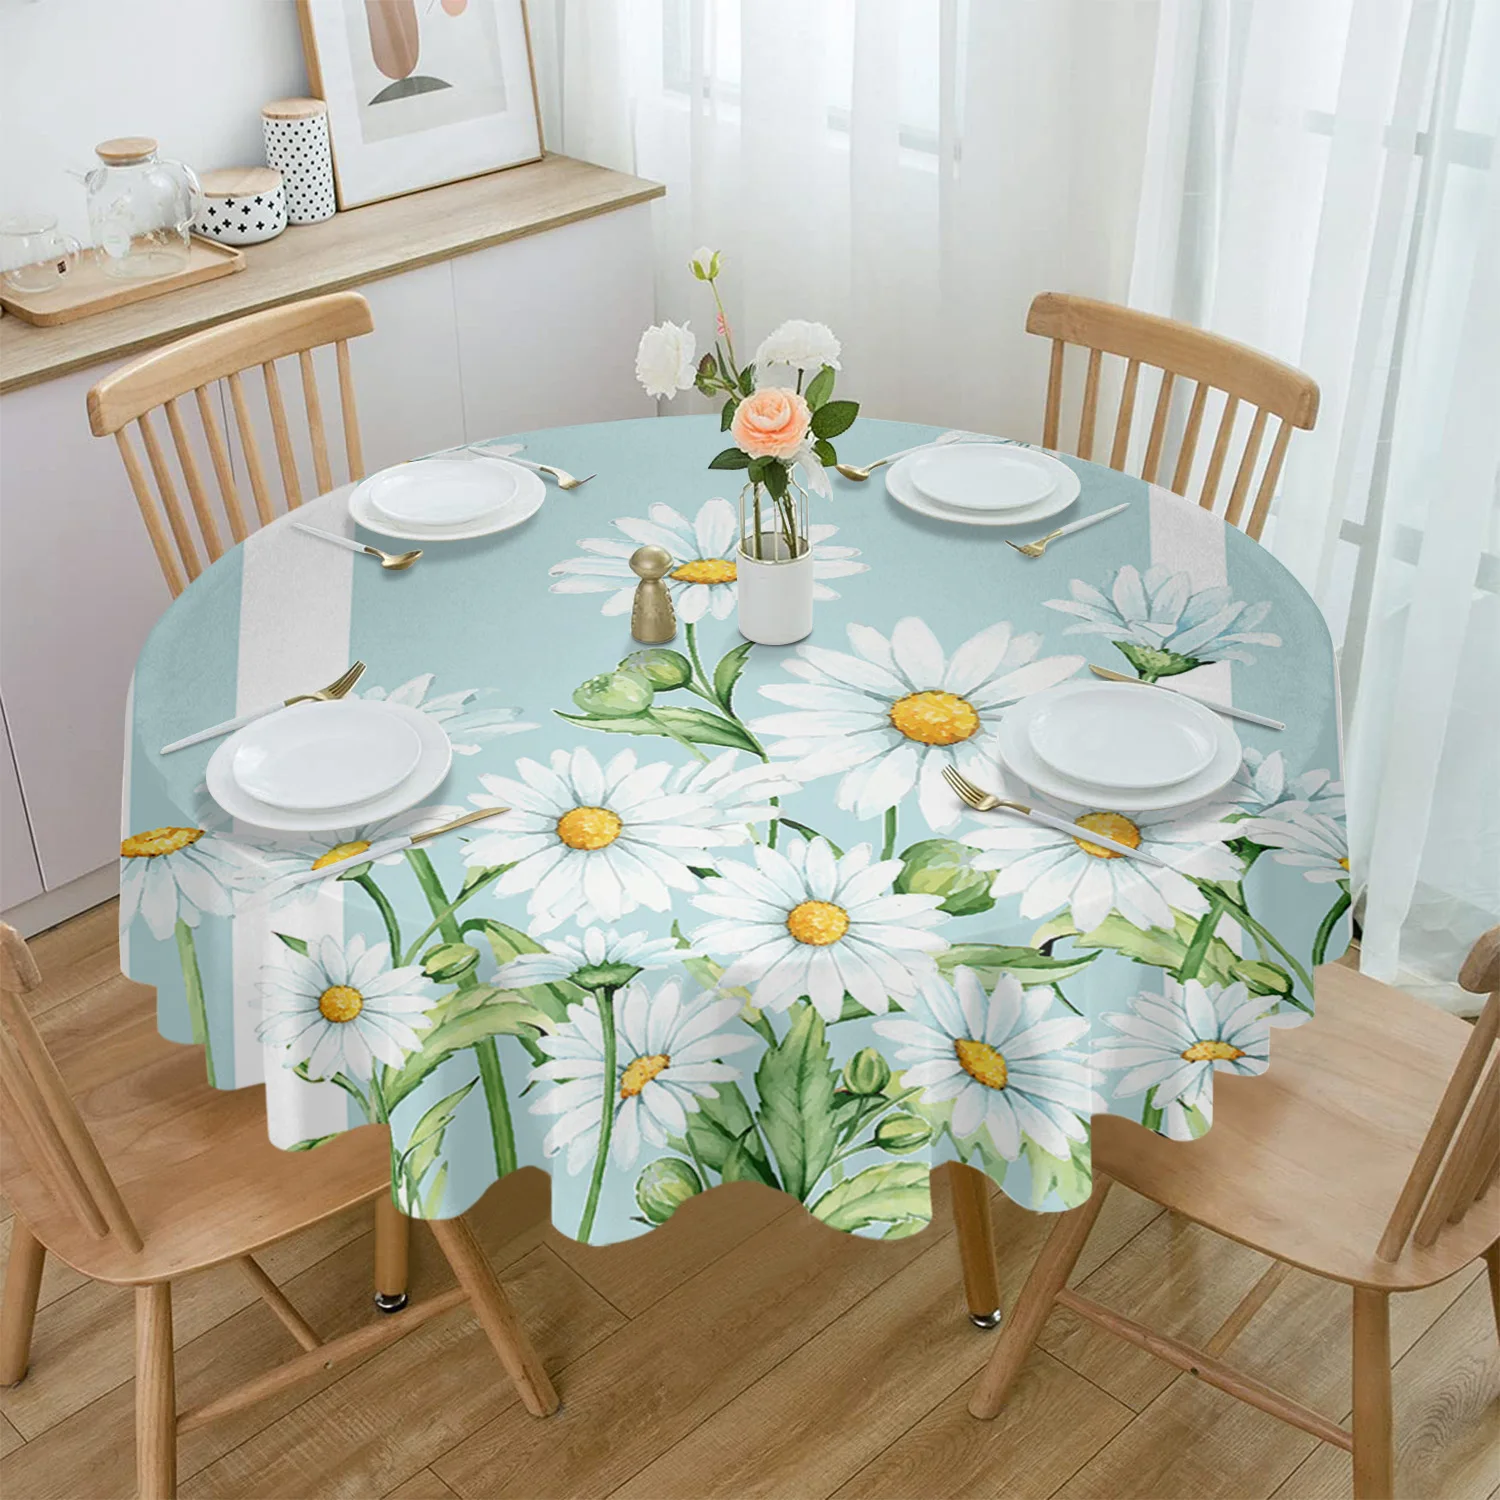 

Flower Daisy Spring Summer Watercolor Waterproof Tablecloth Table Decoration Wedding Home Kitchen Dining Room Round Table Cover